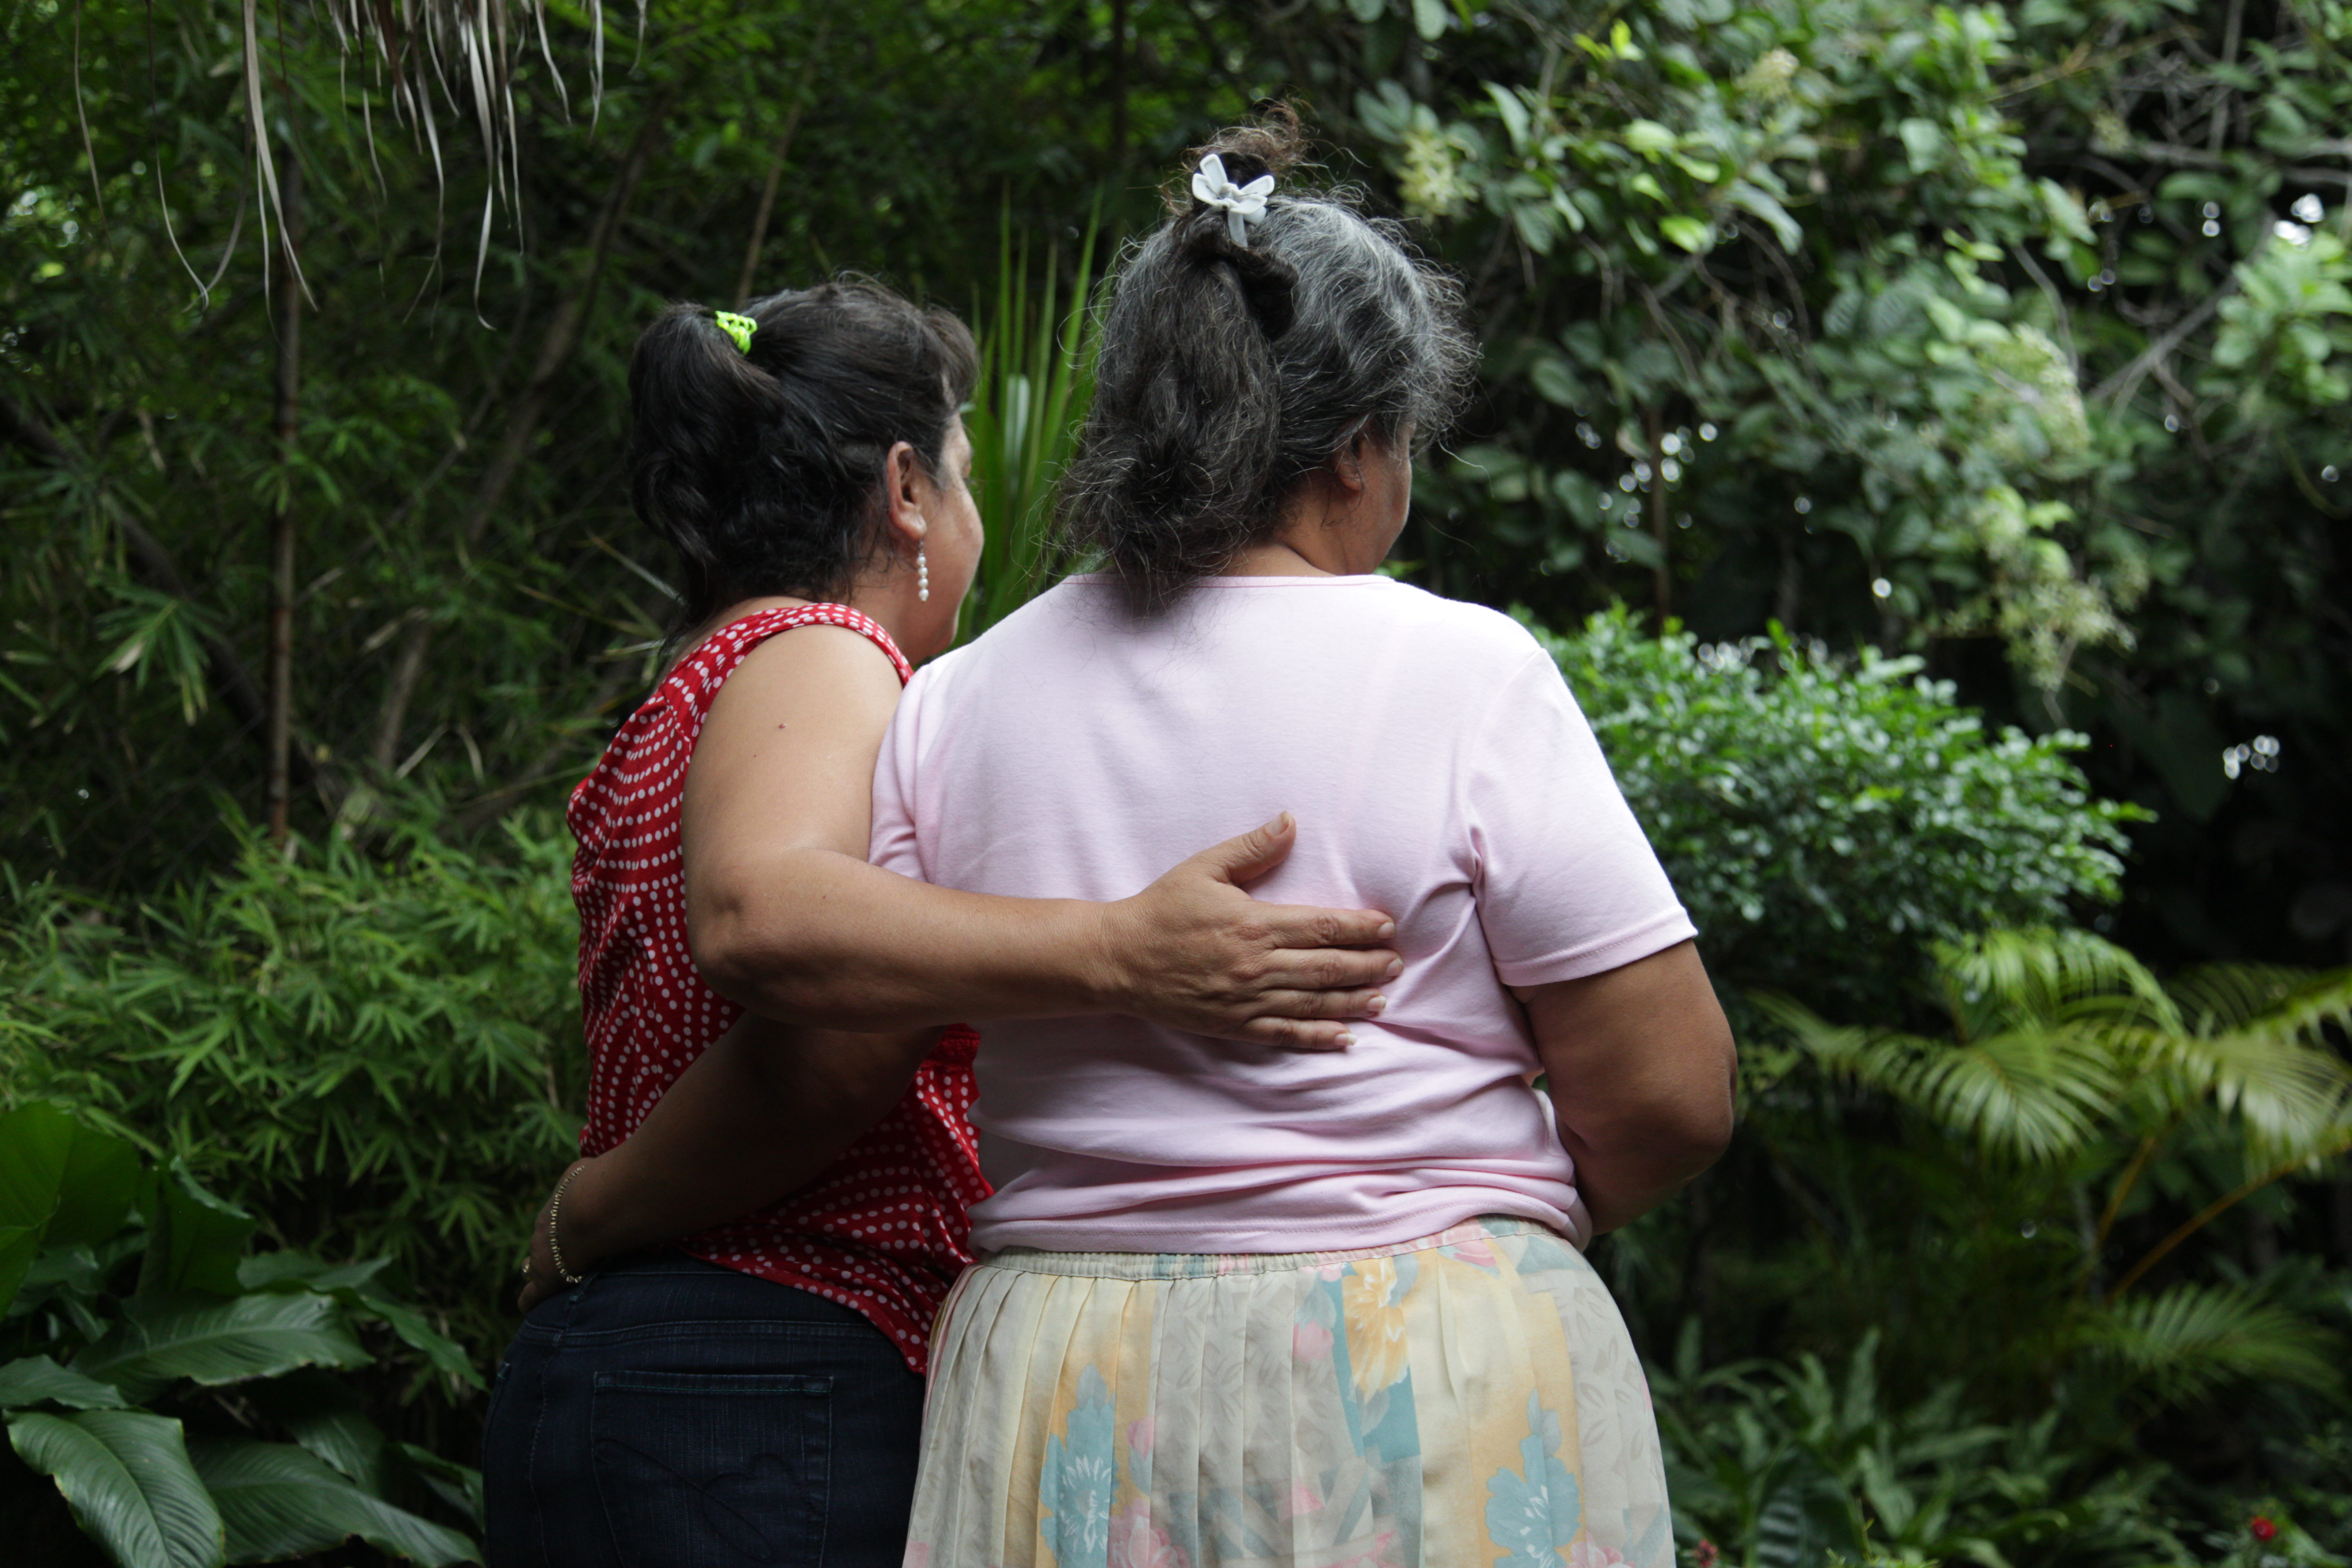 "Isabel and "Ruth" (not their real name) are the mother in law and neighbor of María Teresa Rivera, one of "Las 17" women who are imprisoned in El Salvador with charges of "aggravated homicides" under the suspicion of having had an abortion.